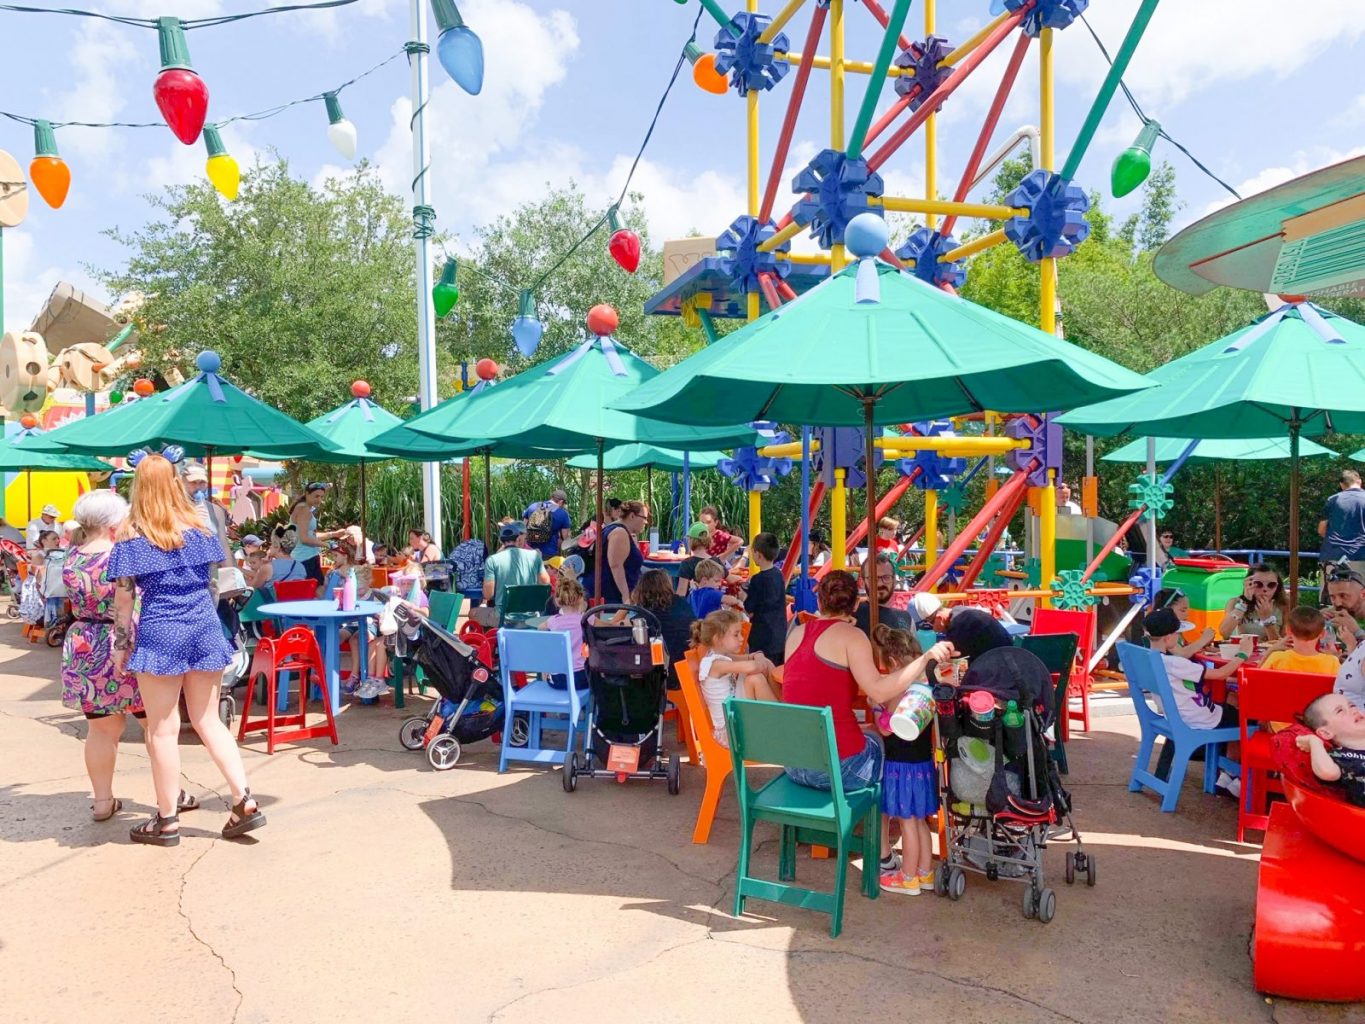 the seating area for Woody's Lunch Box in Toy Story Land